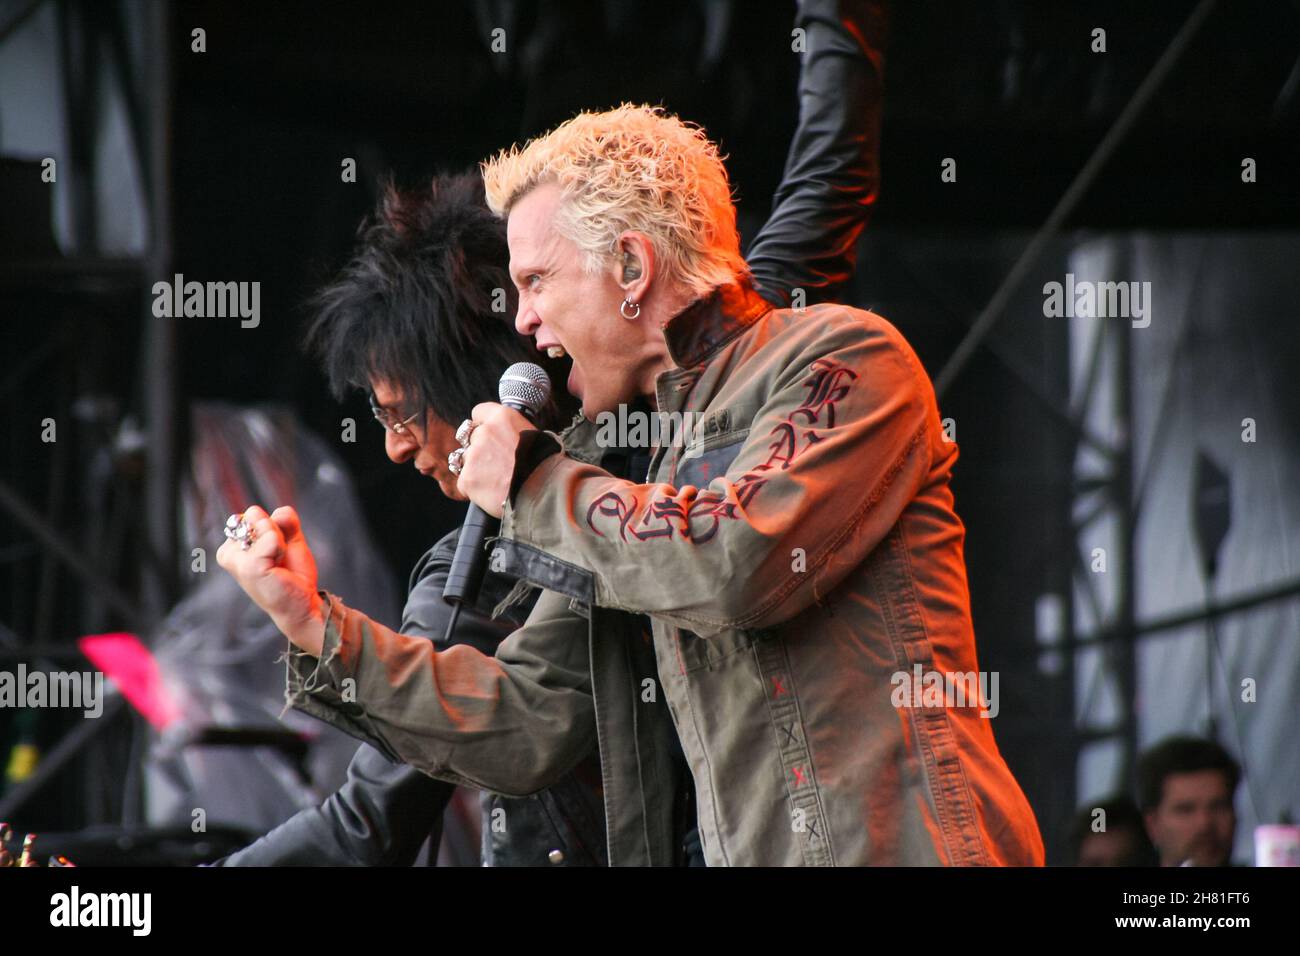 Billy Idol, English rock singer, born as William Michael Albert Broad,  performs at Rock am Ring 2005 festival at the Nürburgring race track in  Germany, 5th June, 2005 Stock Photo - Alamy